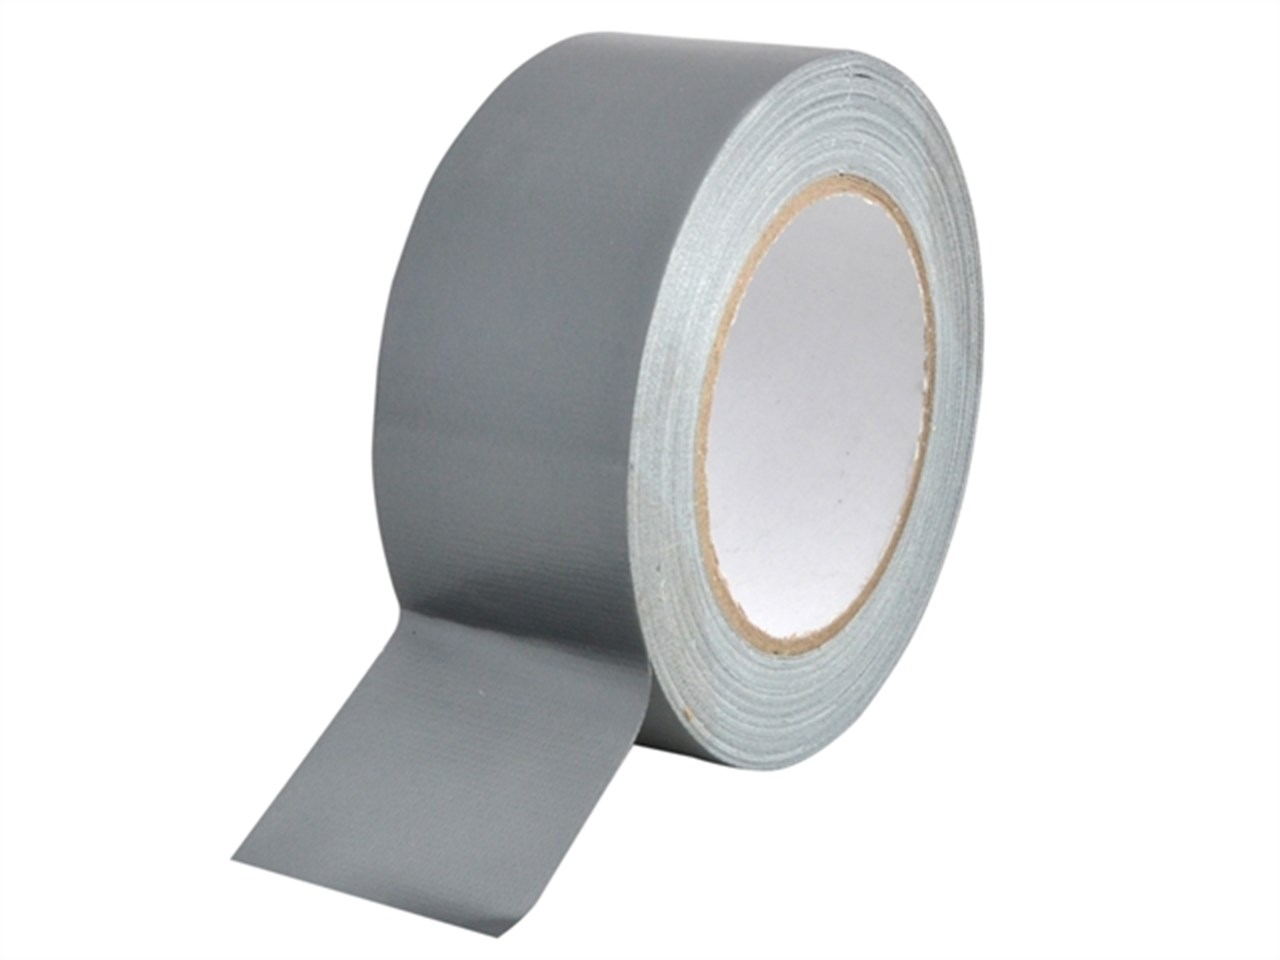 75mm x 50m Silver Gaffer Tape (Duct Tape)